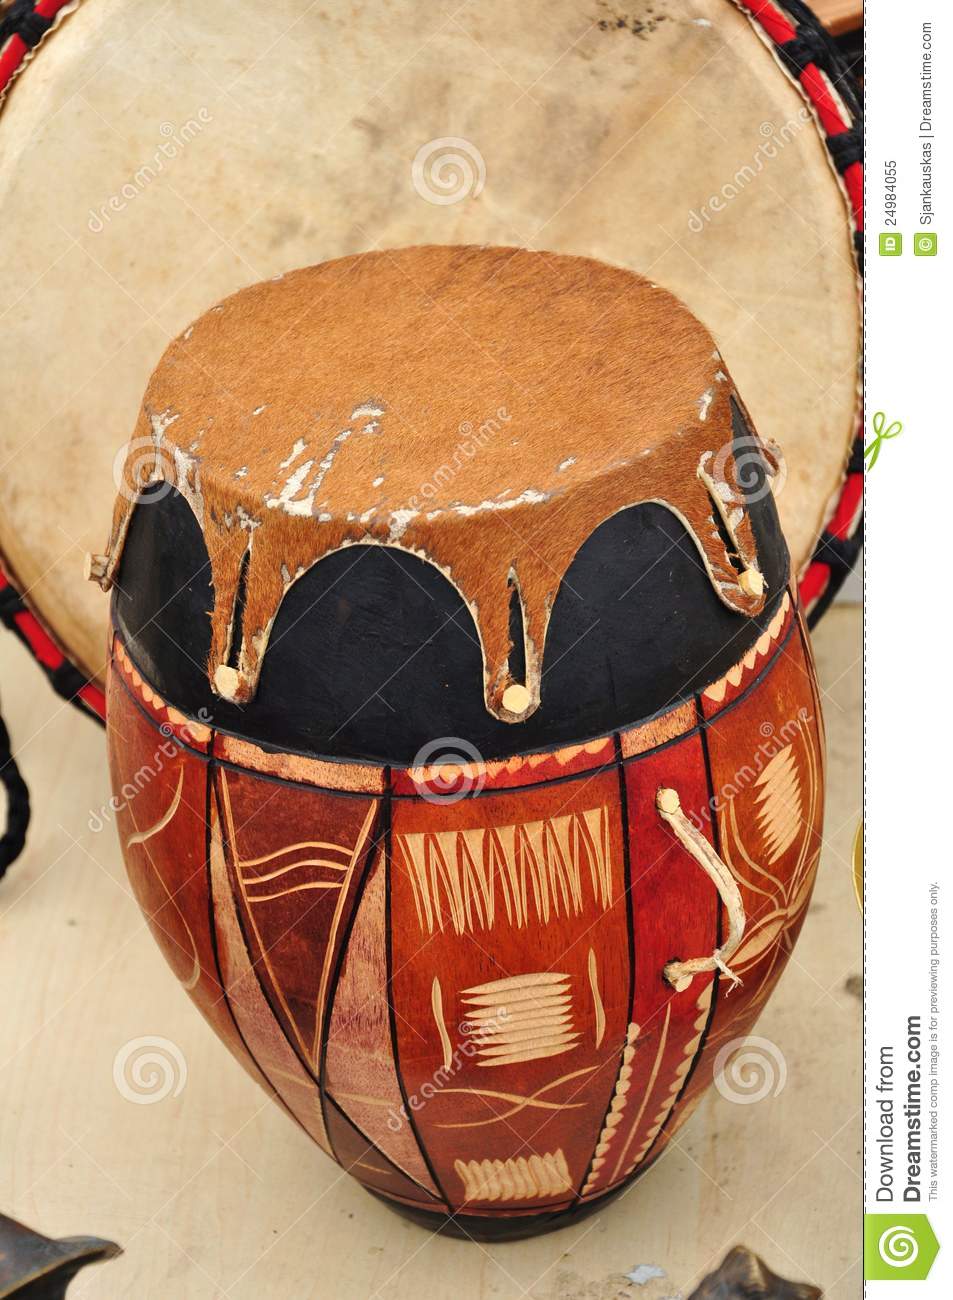 Traditional Indian Drum Royalty Free Stock Photo   Image  24984055